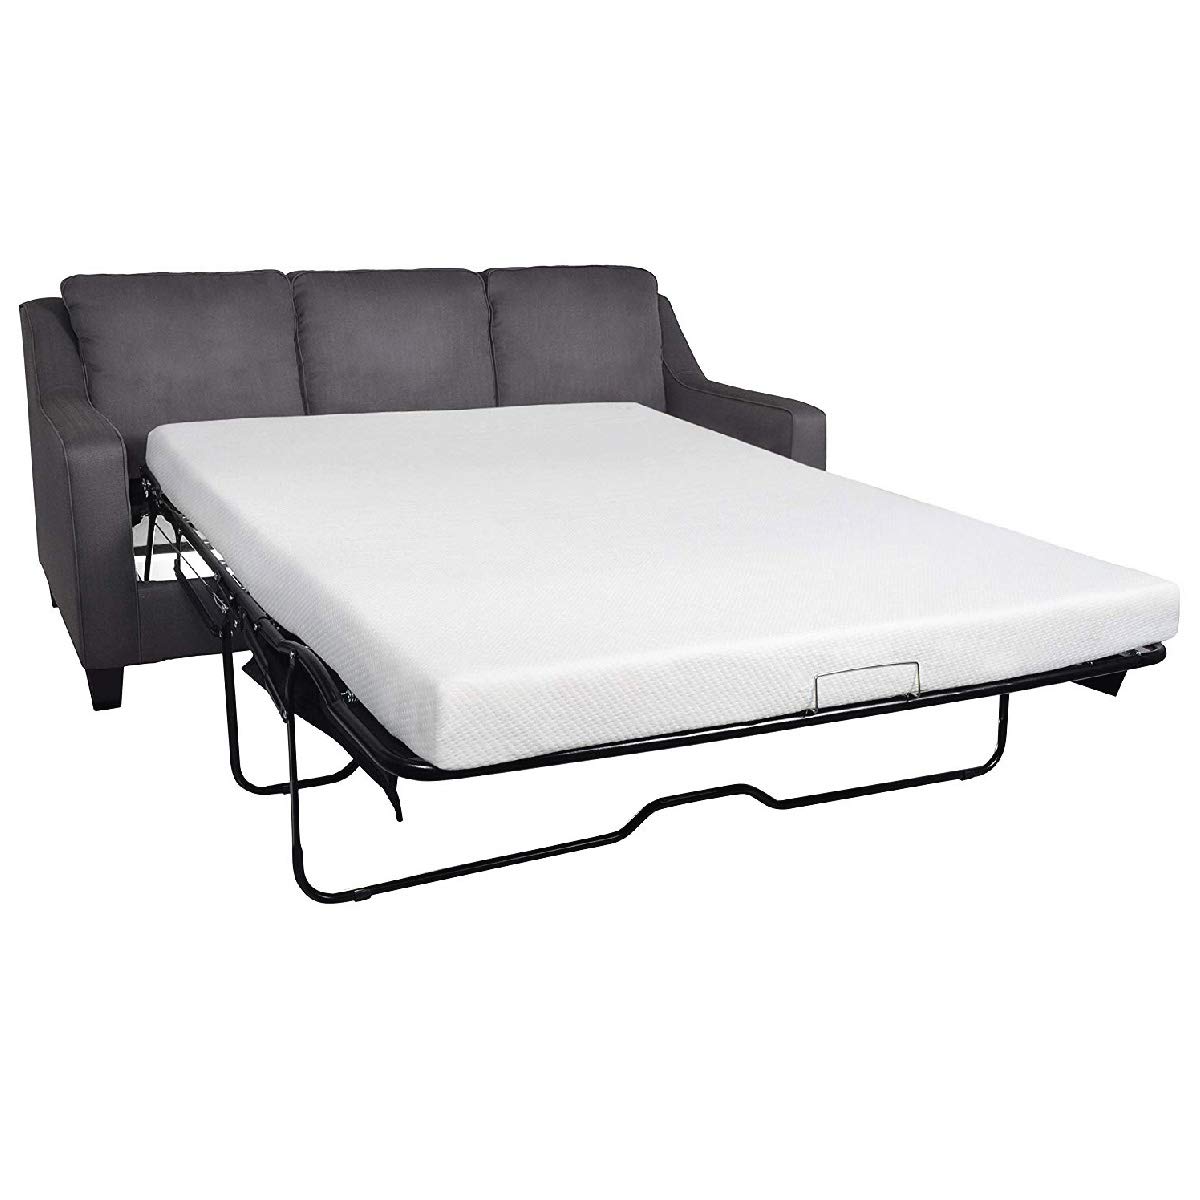 mattress for sofa bed replacement